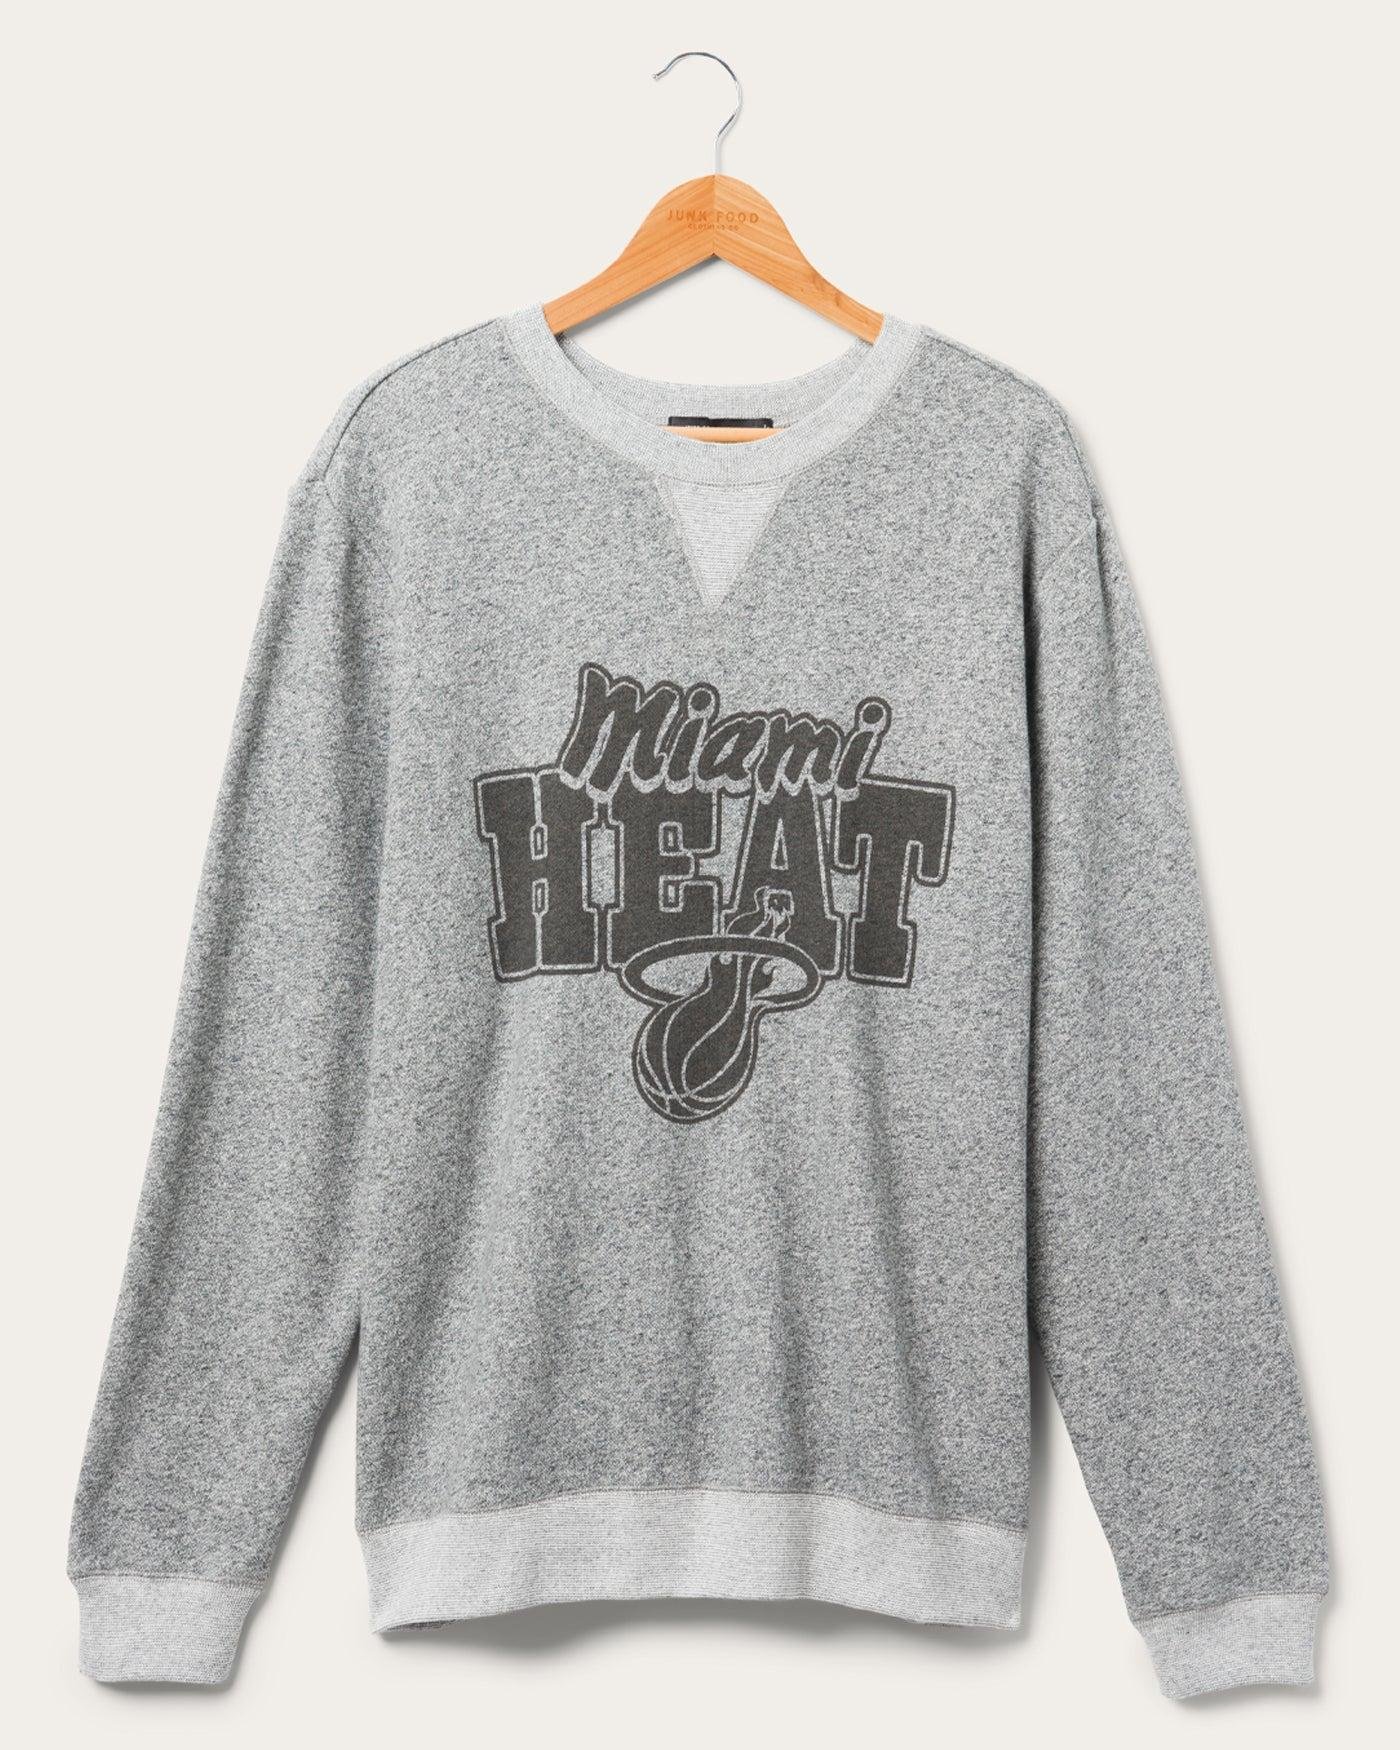 Junk Food Clothing Heat Formation Fleece Pullover by JUNK FOOD CLOTHING